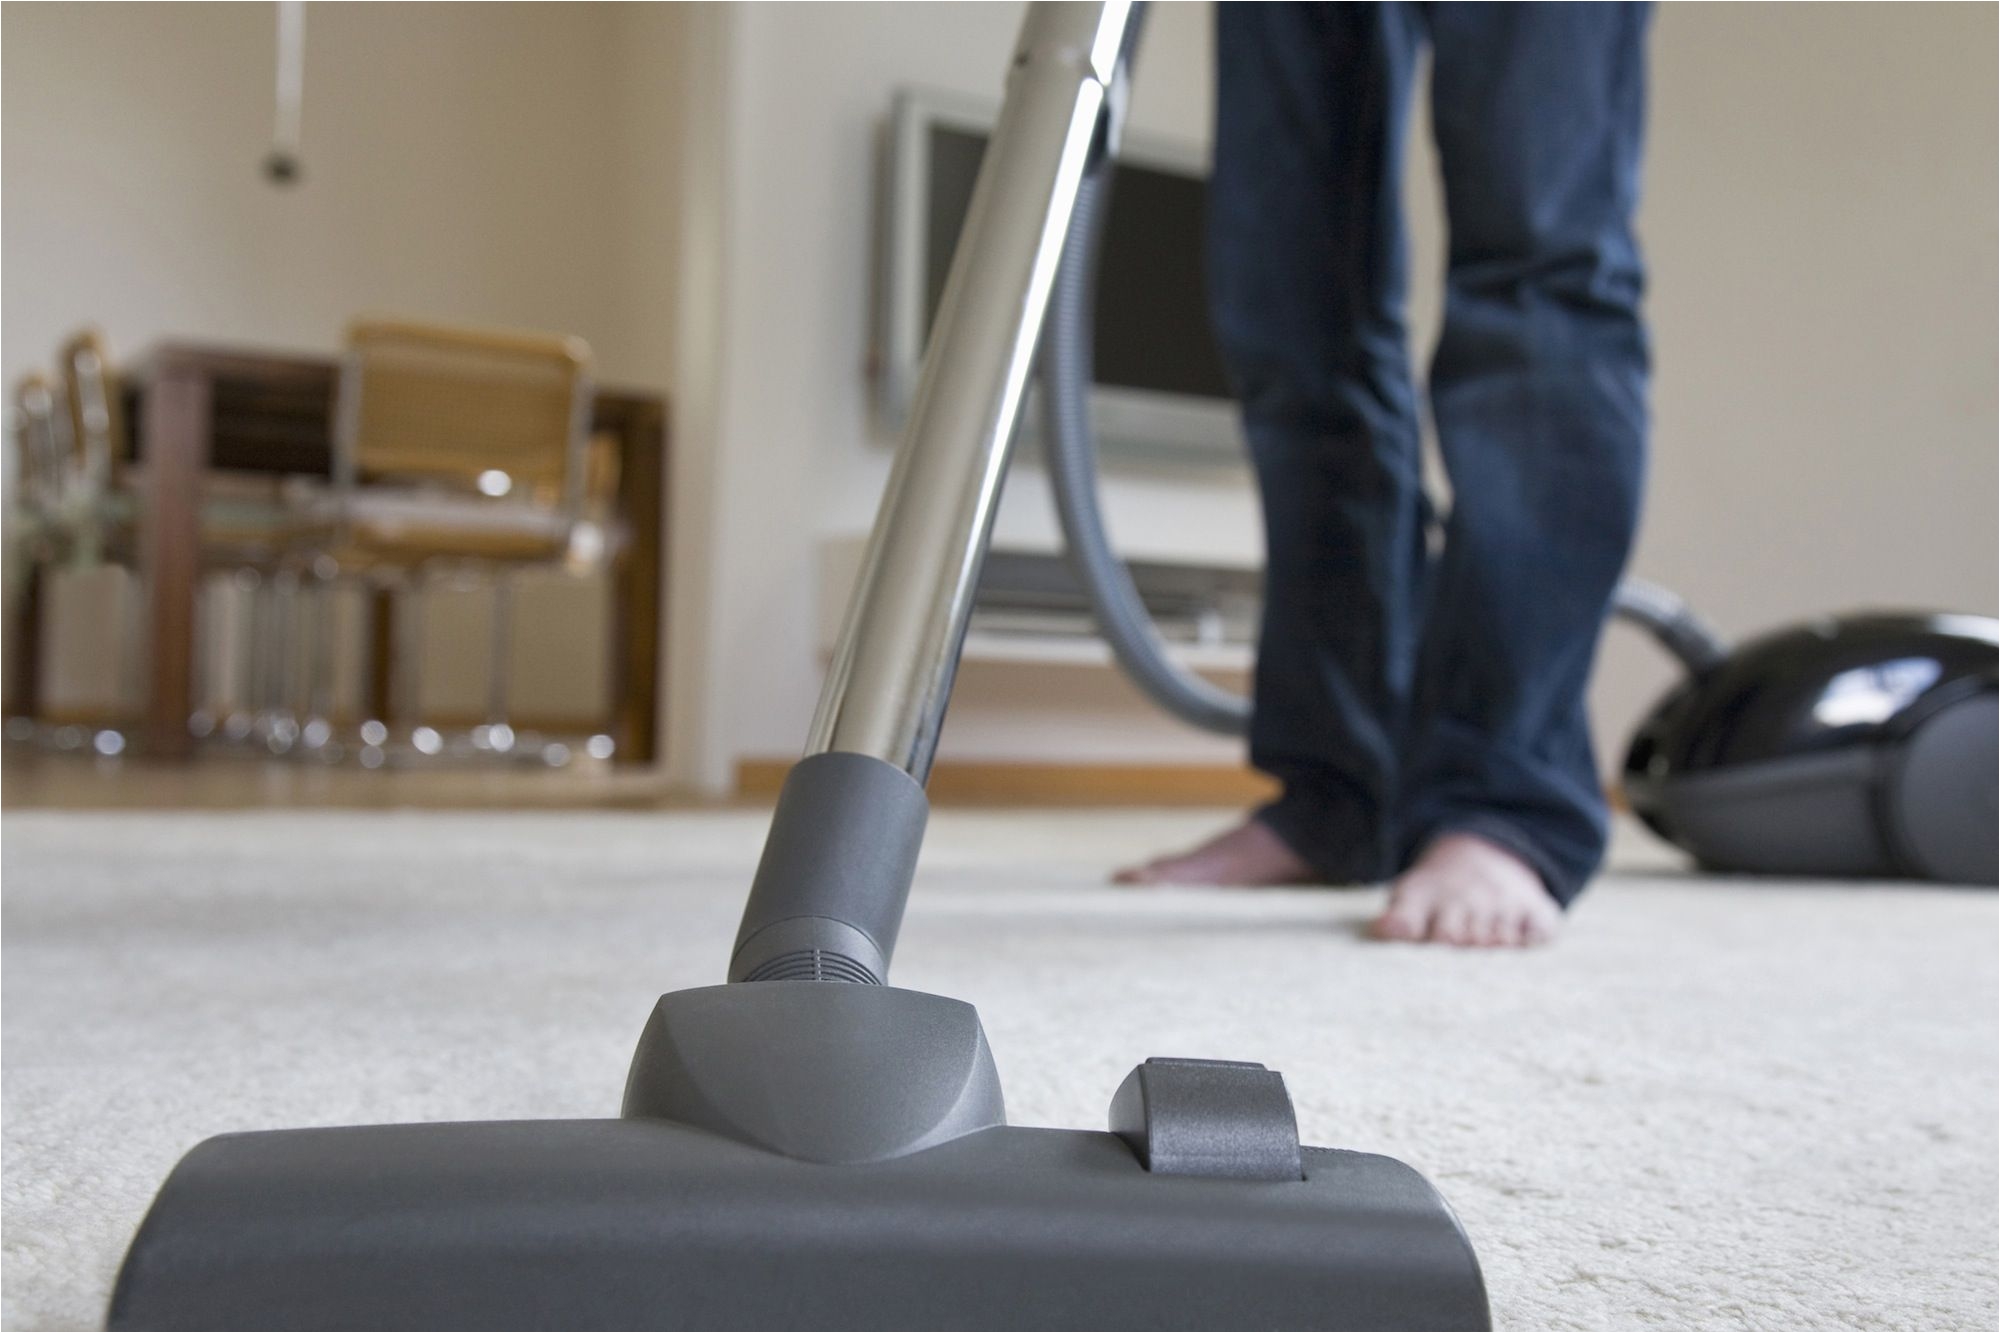 Best Manual Sweeper for Hardwood Floors the Difference Between A Vacuum and Carpet Steamer